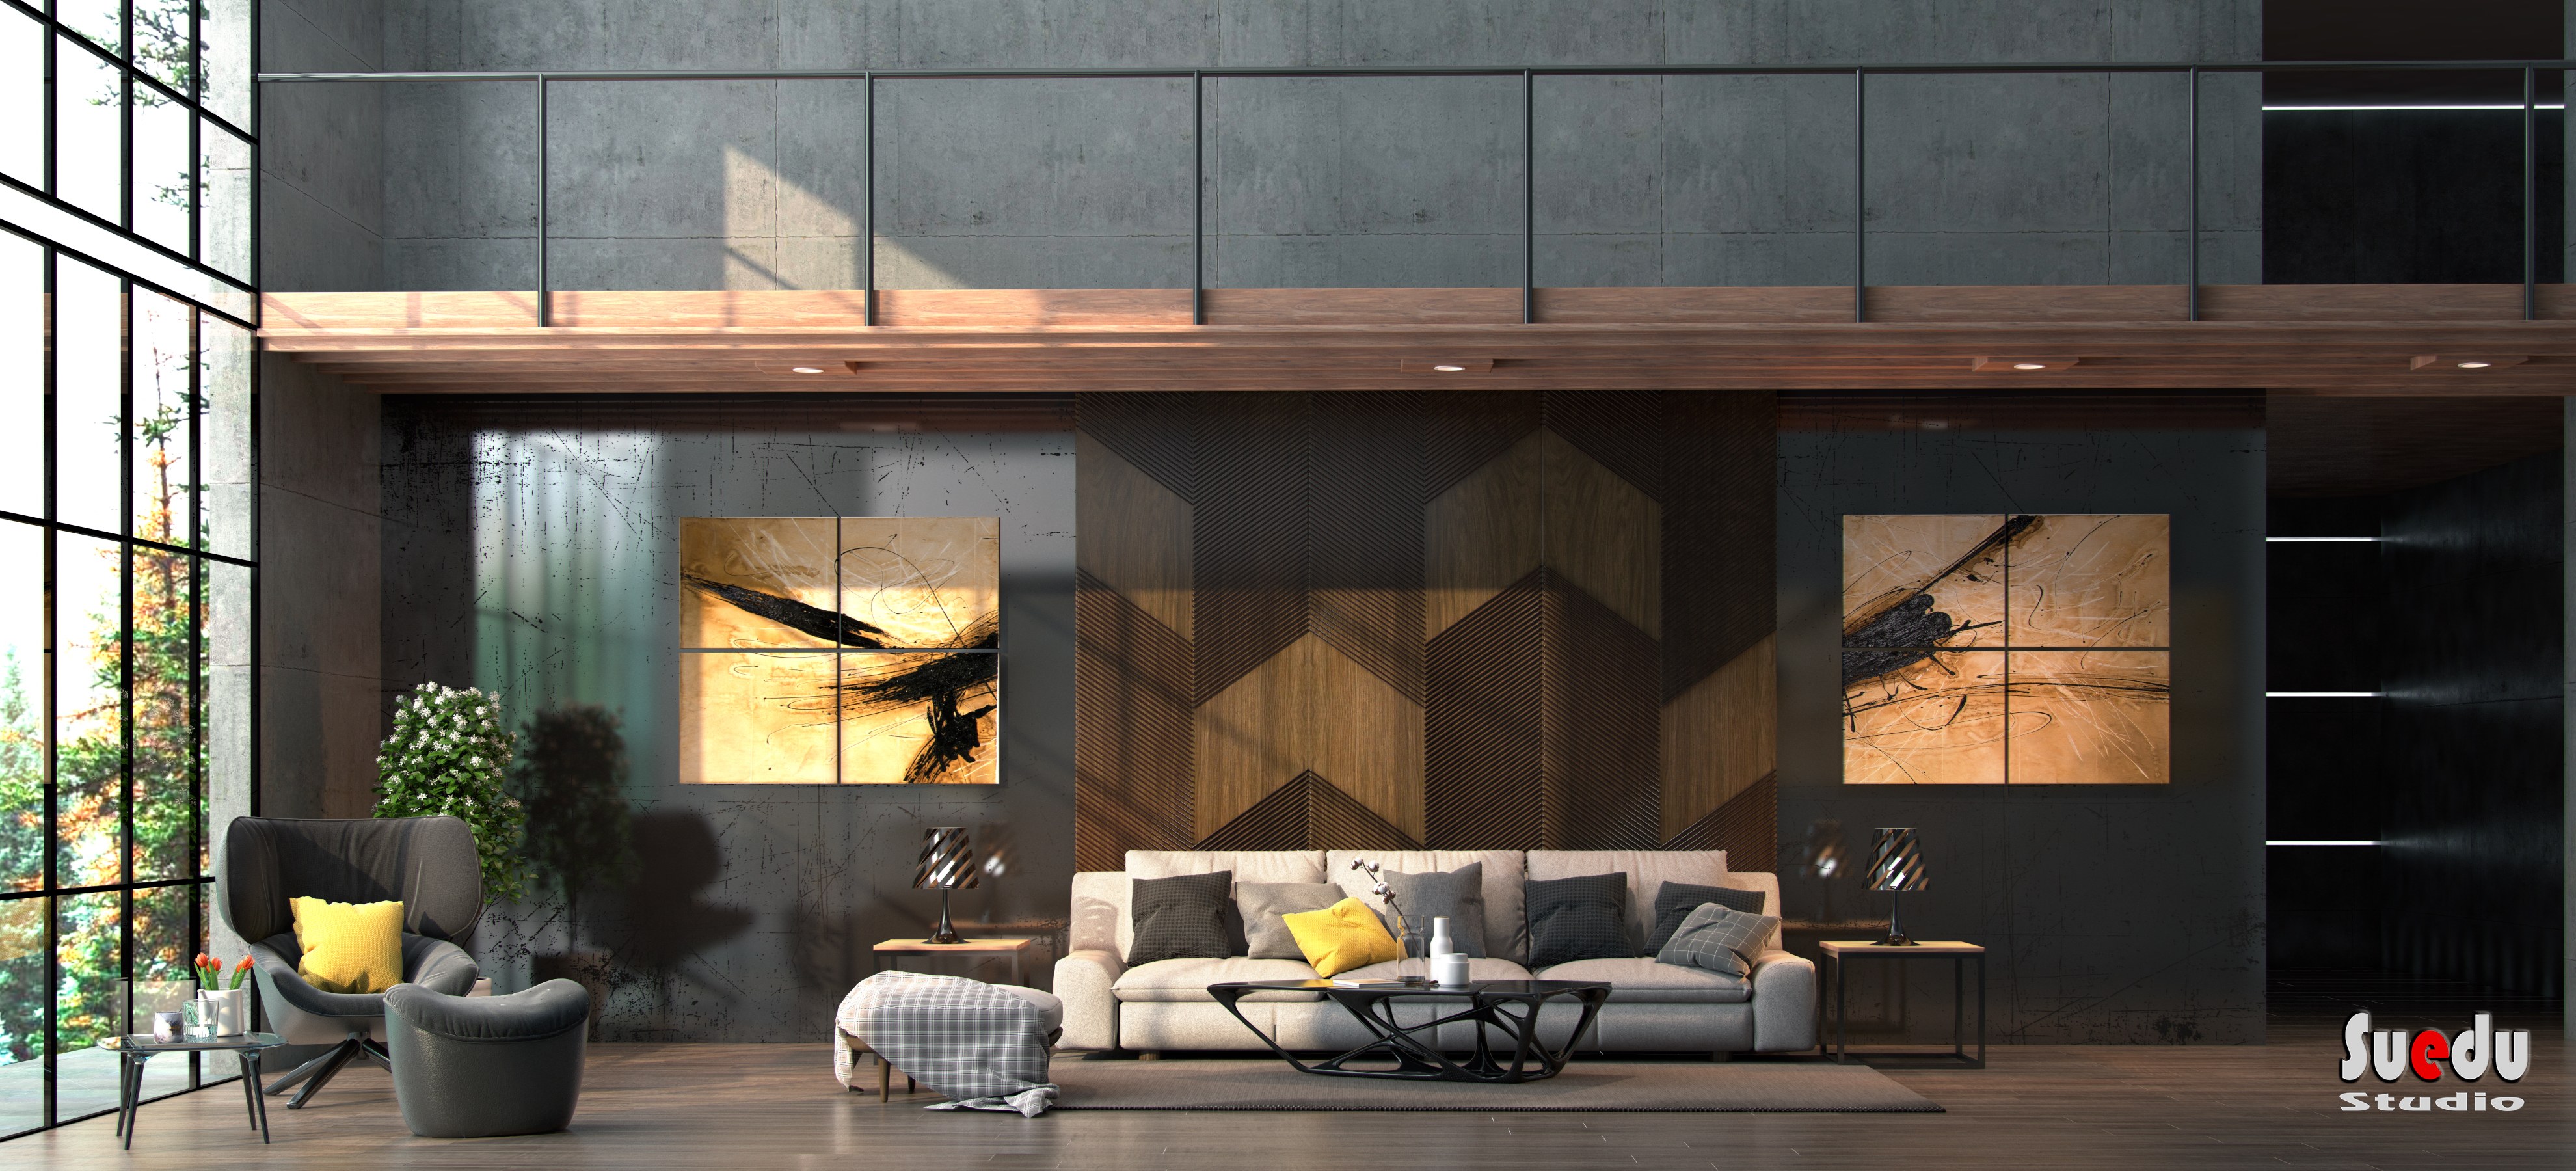 Phan Thức Overview of living room Vray 3.4 render